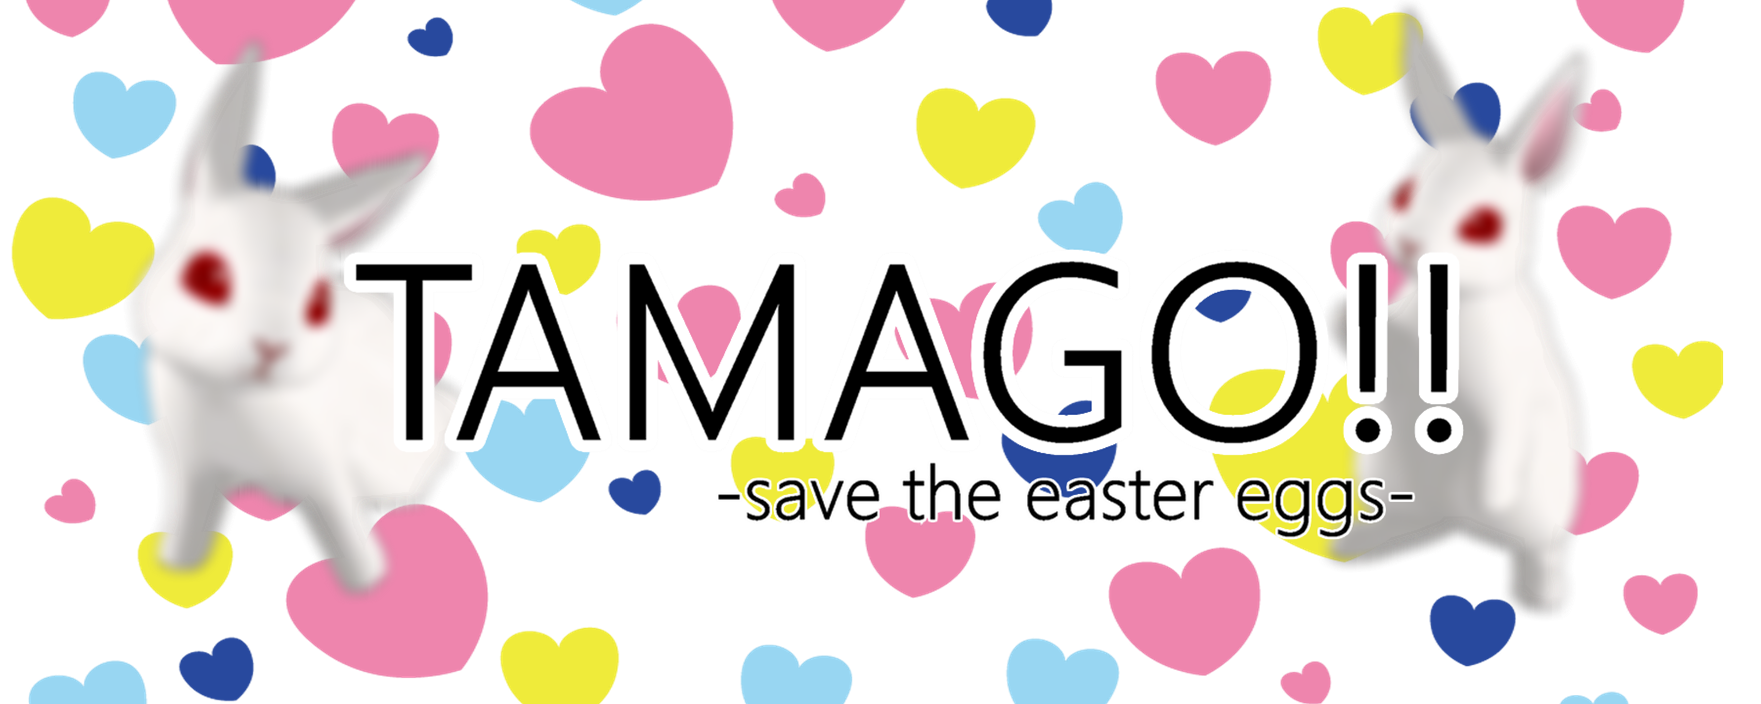 TAMAGO!! -save the easter eggs-